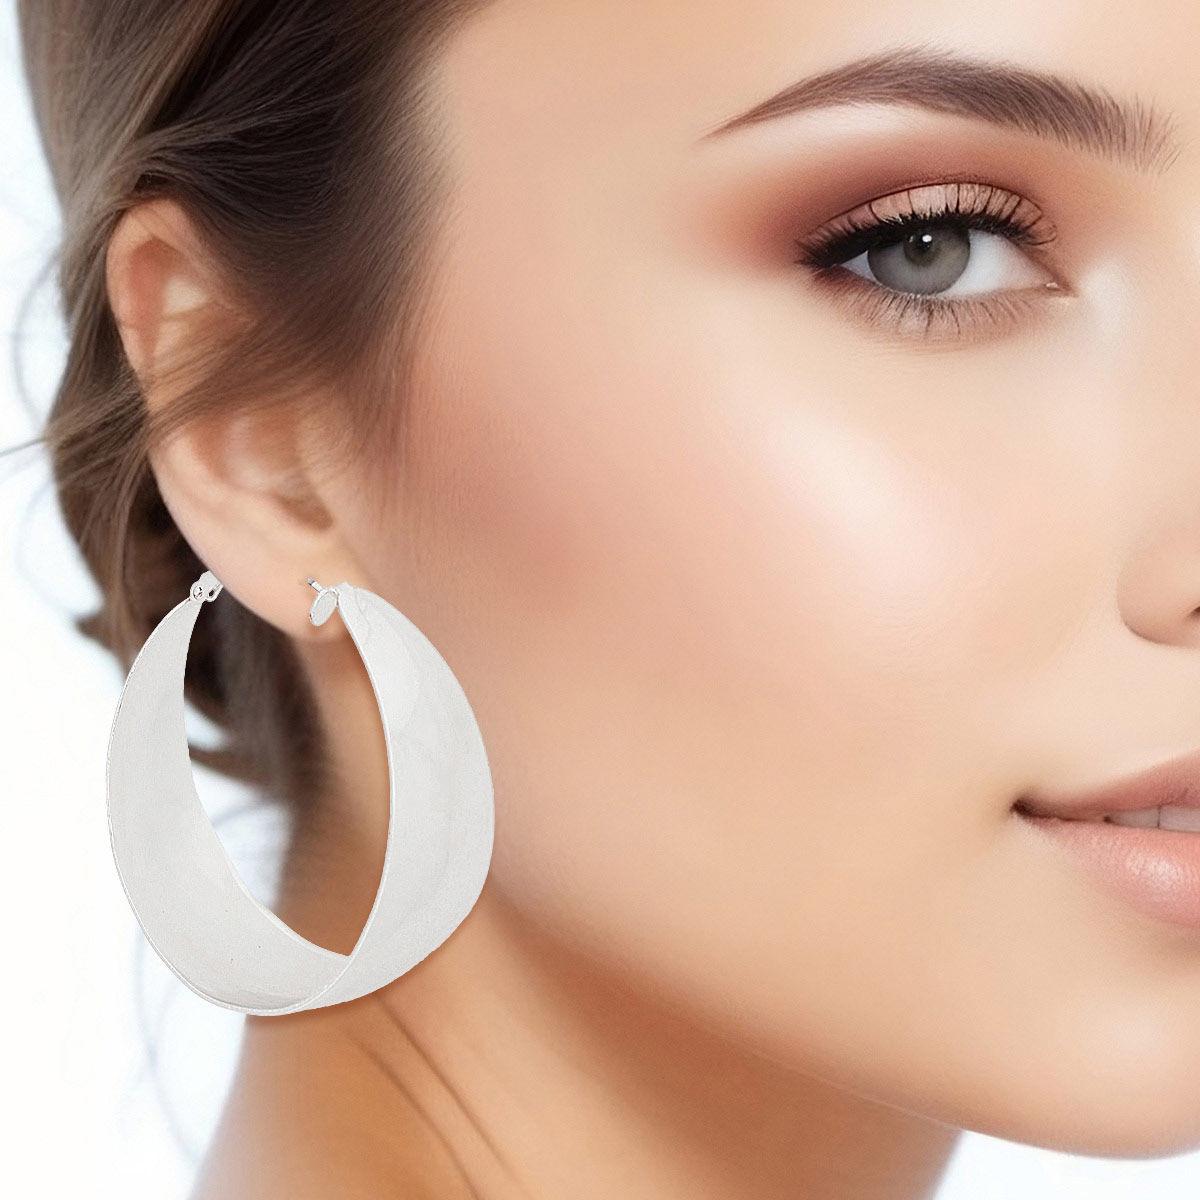 Perfect Accessory: Versatile, Easy-to-Style Silver Hoop Earrings